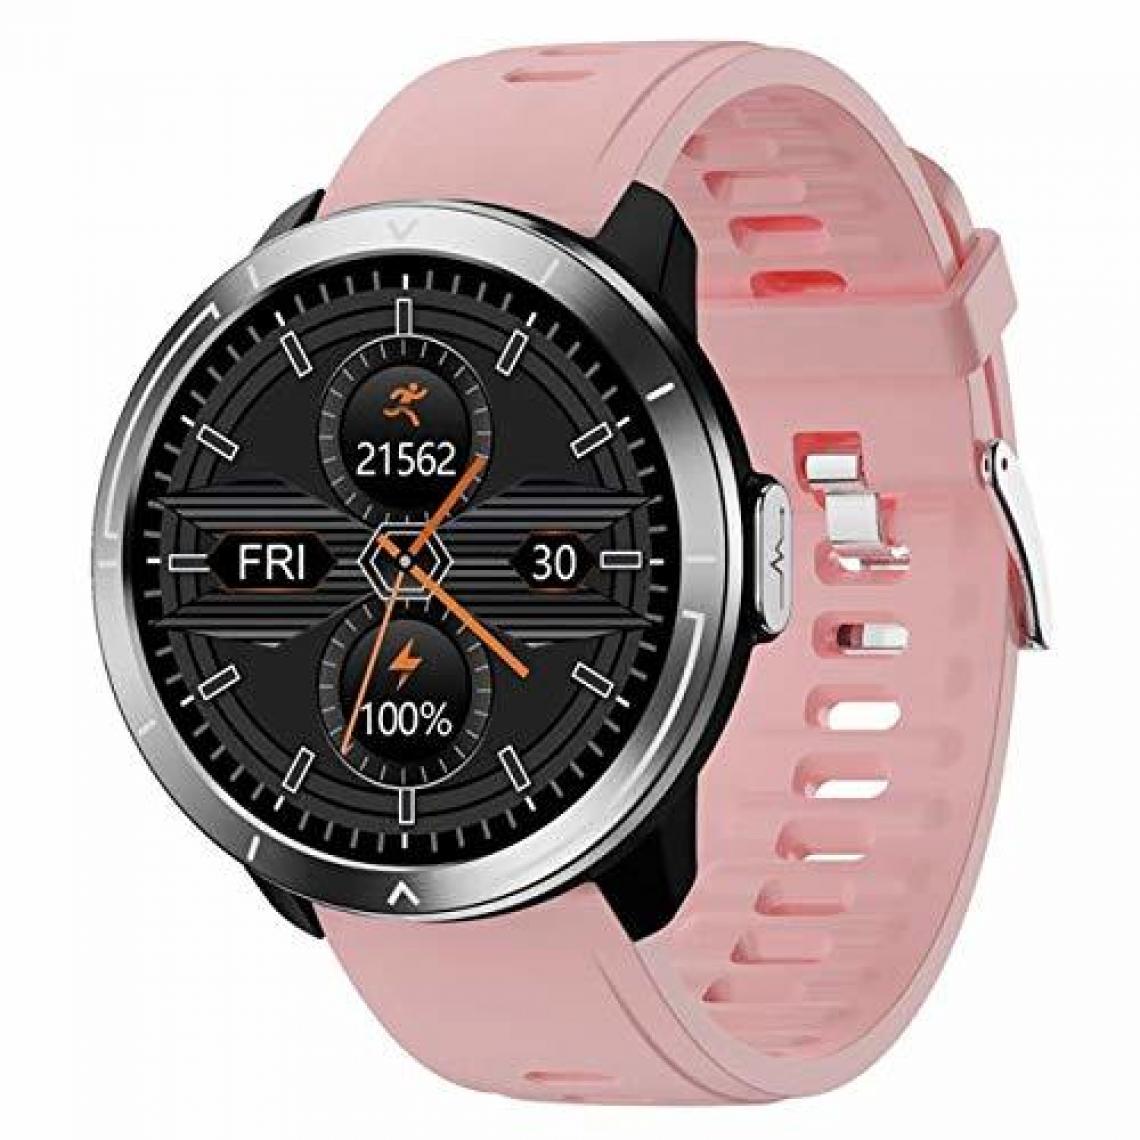 Chronotech Montres - Smart Watch,1.3 inch Touch Screen Smartwatch,Fitness Trackers With Heart Rate Monitor,Waterproof IP67 Activity Pedometer Stopwatch,Sport Watch for Men Women for iPhone Android Phone(Rose) - Montre connectée